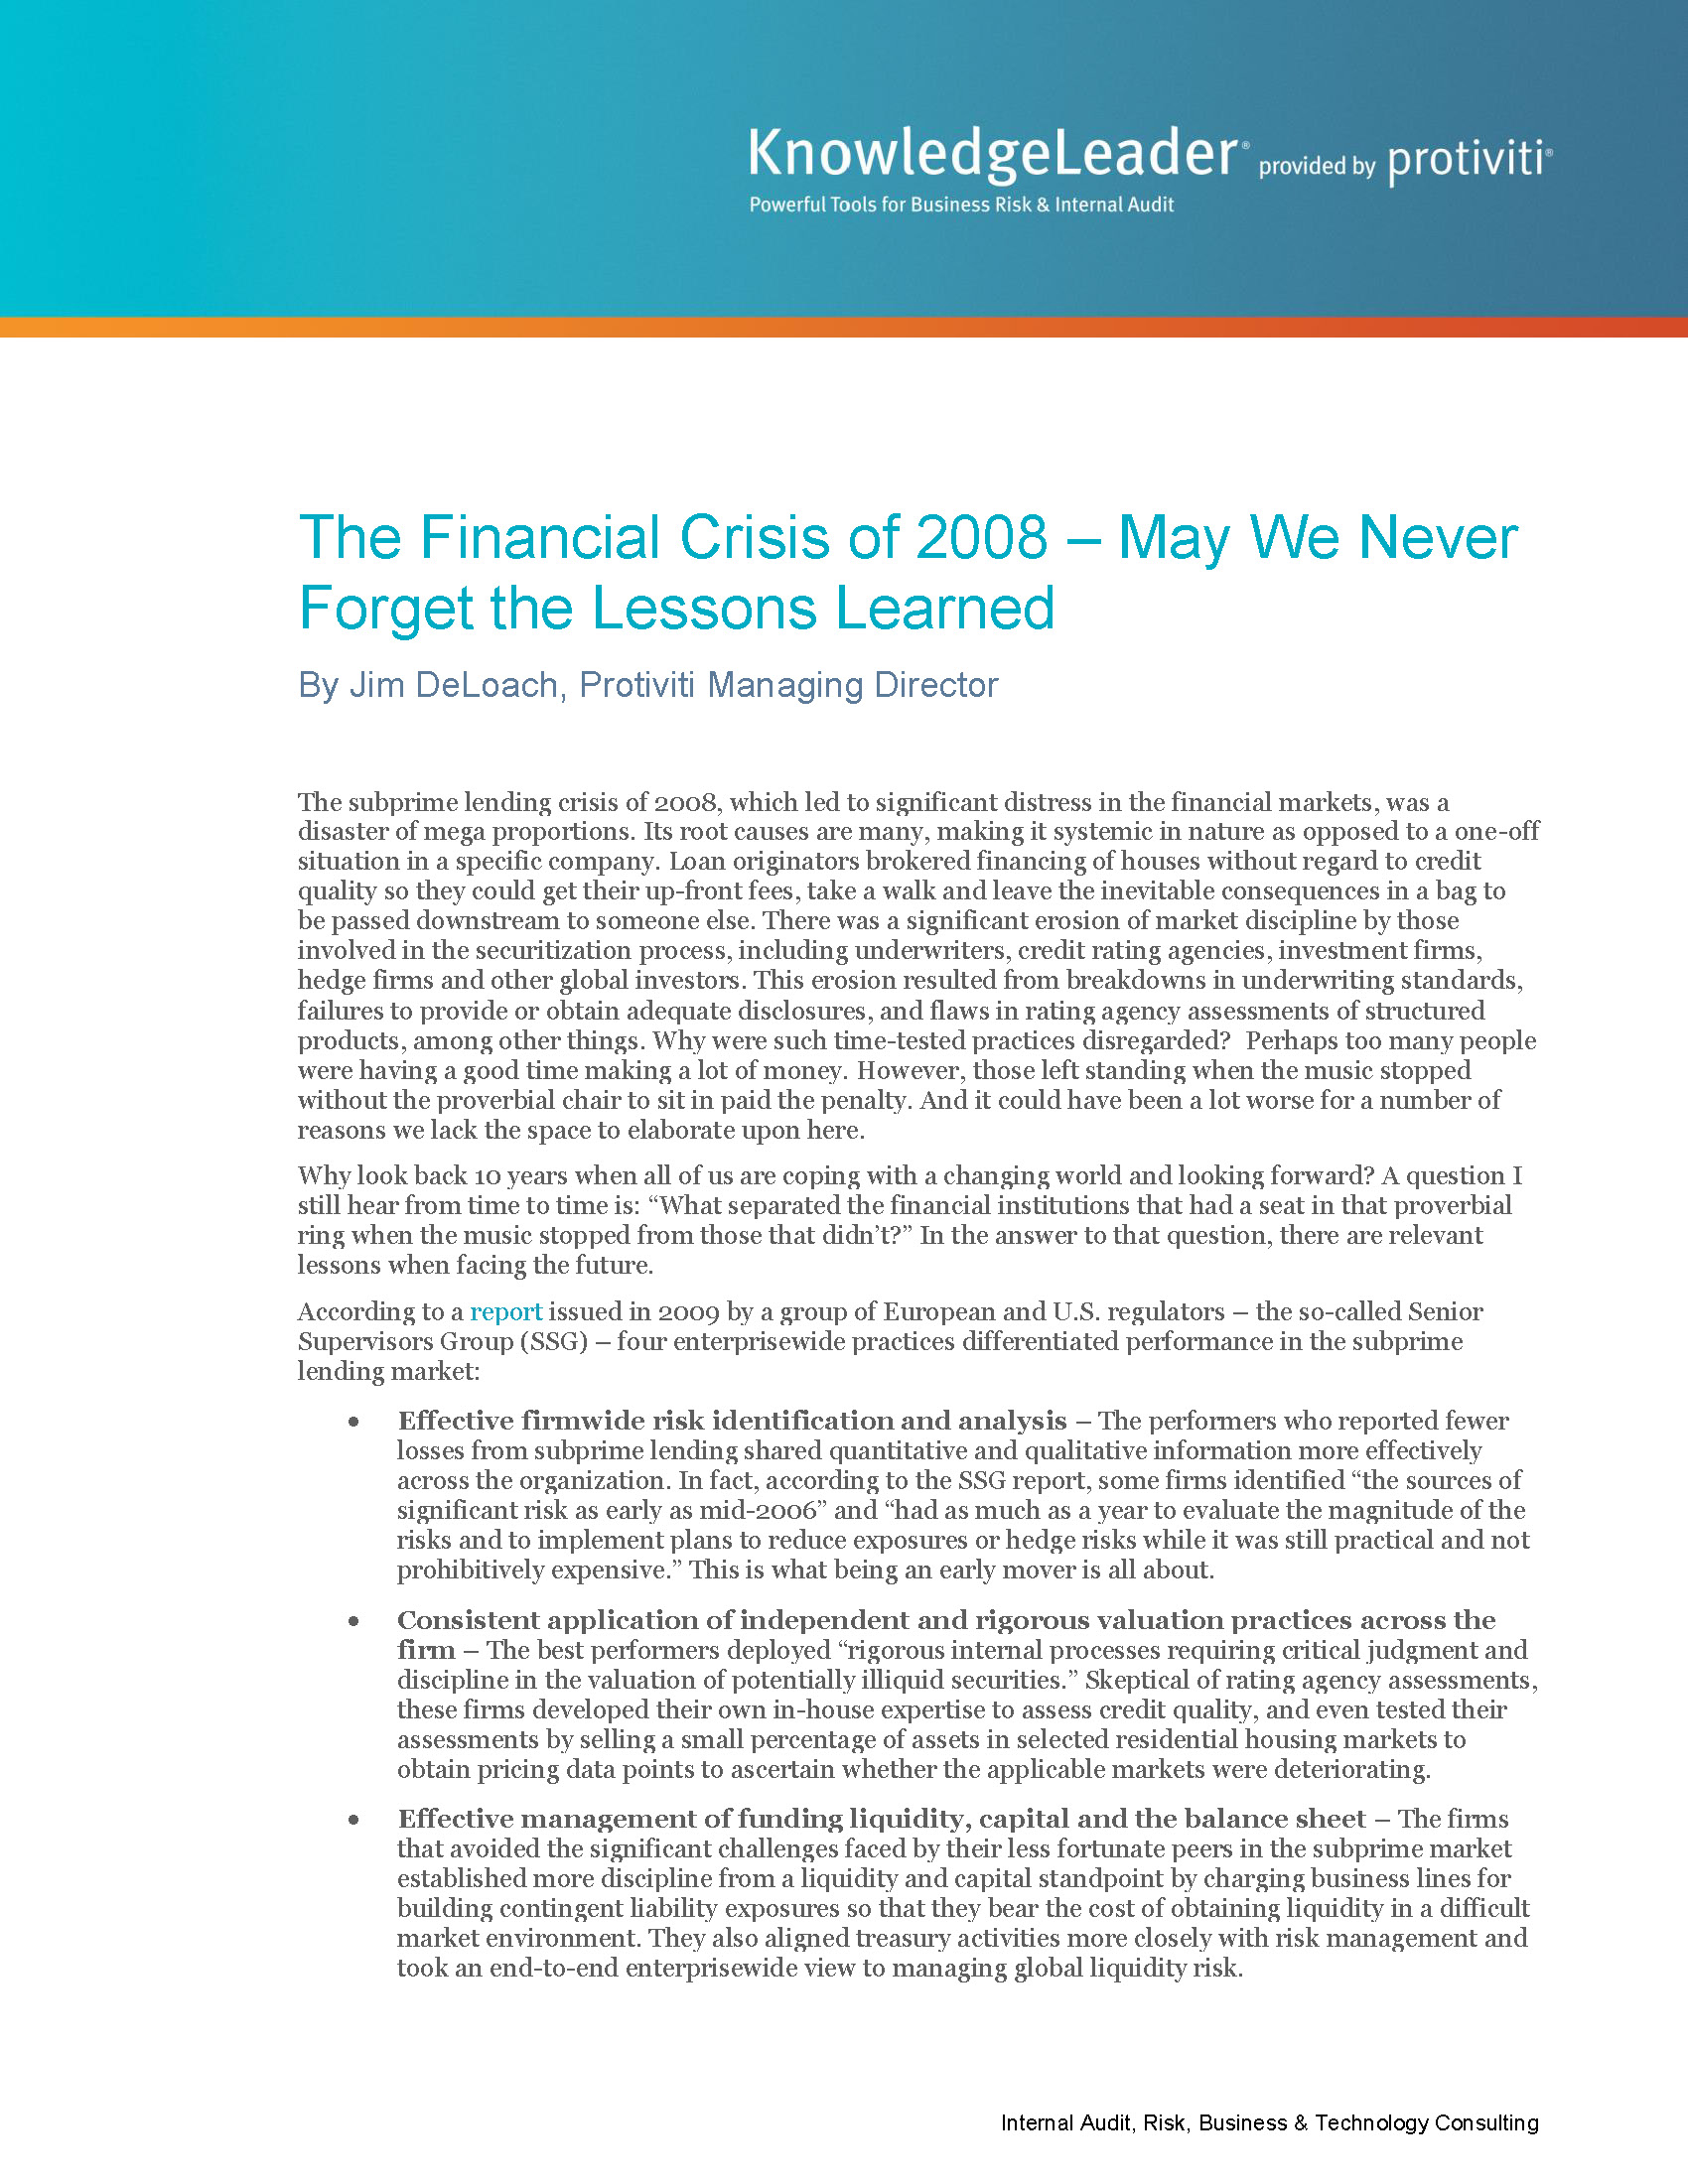 Screenshot of the first page of The Financial Crisis of 2008 – May We Never Forget the Lessons Learned